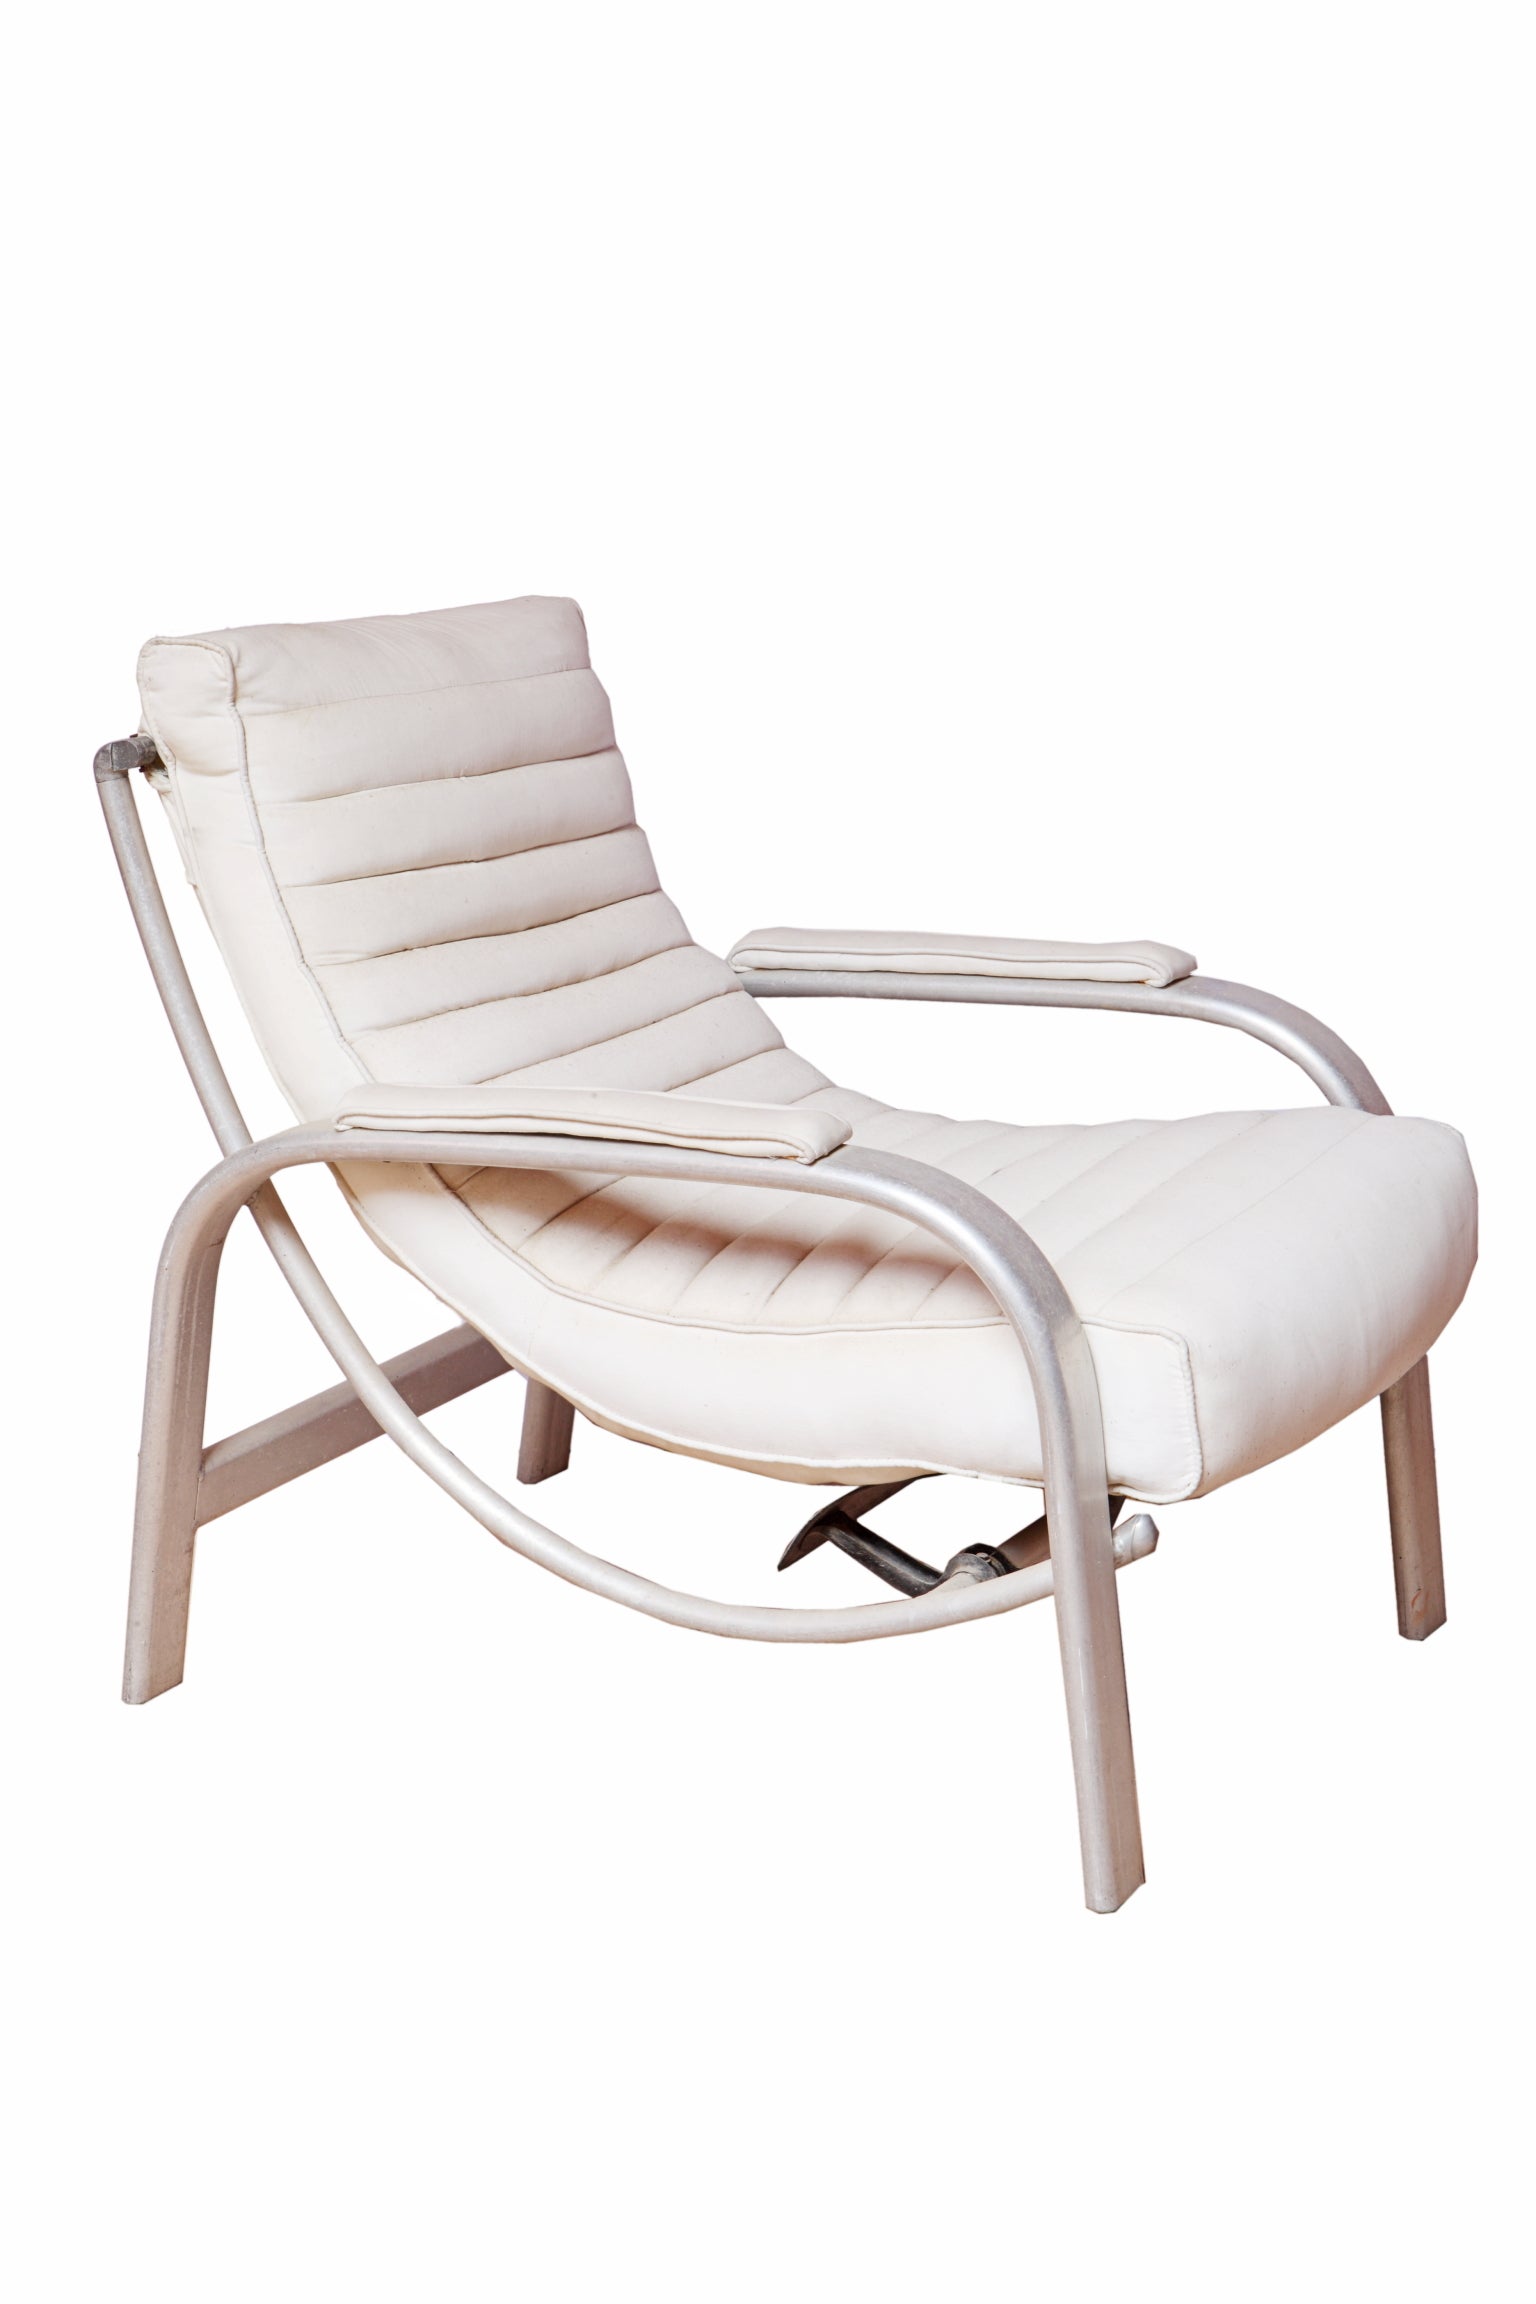 Pair of French Aluminium “Zeppelin” Lounge Chairs For Sale